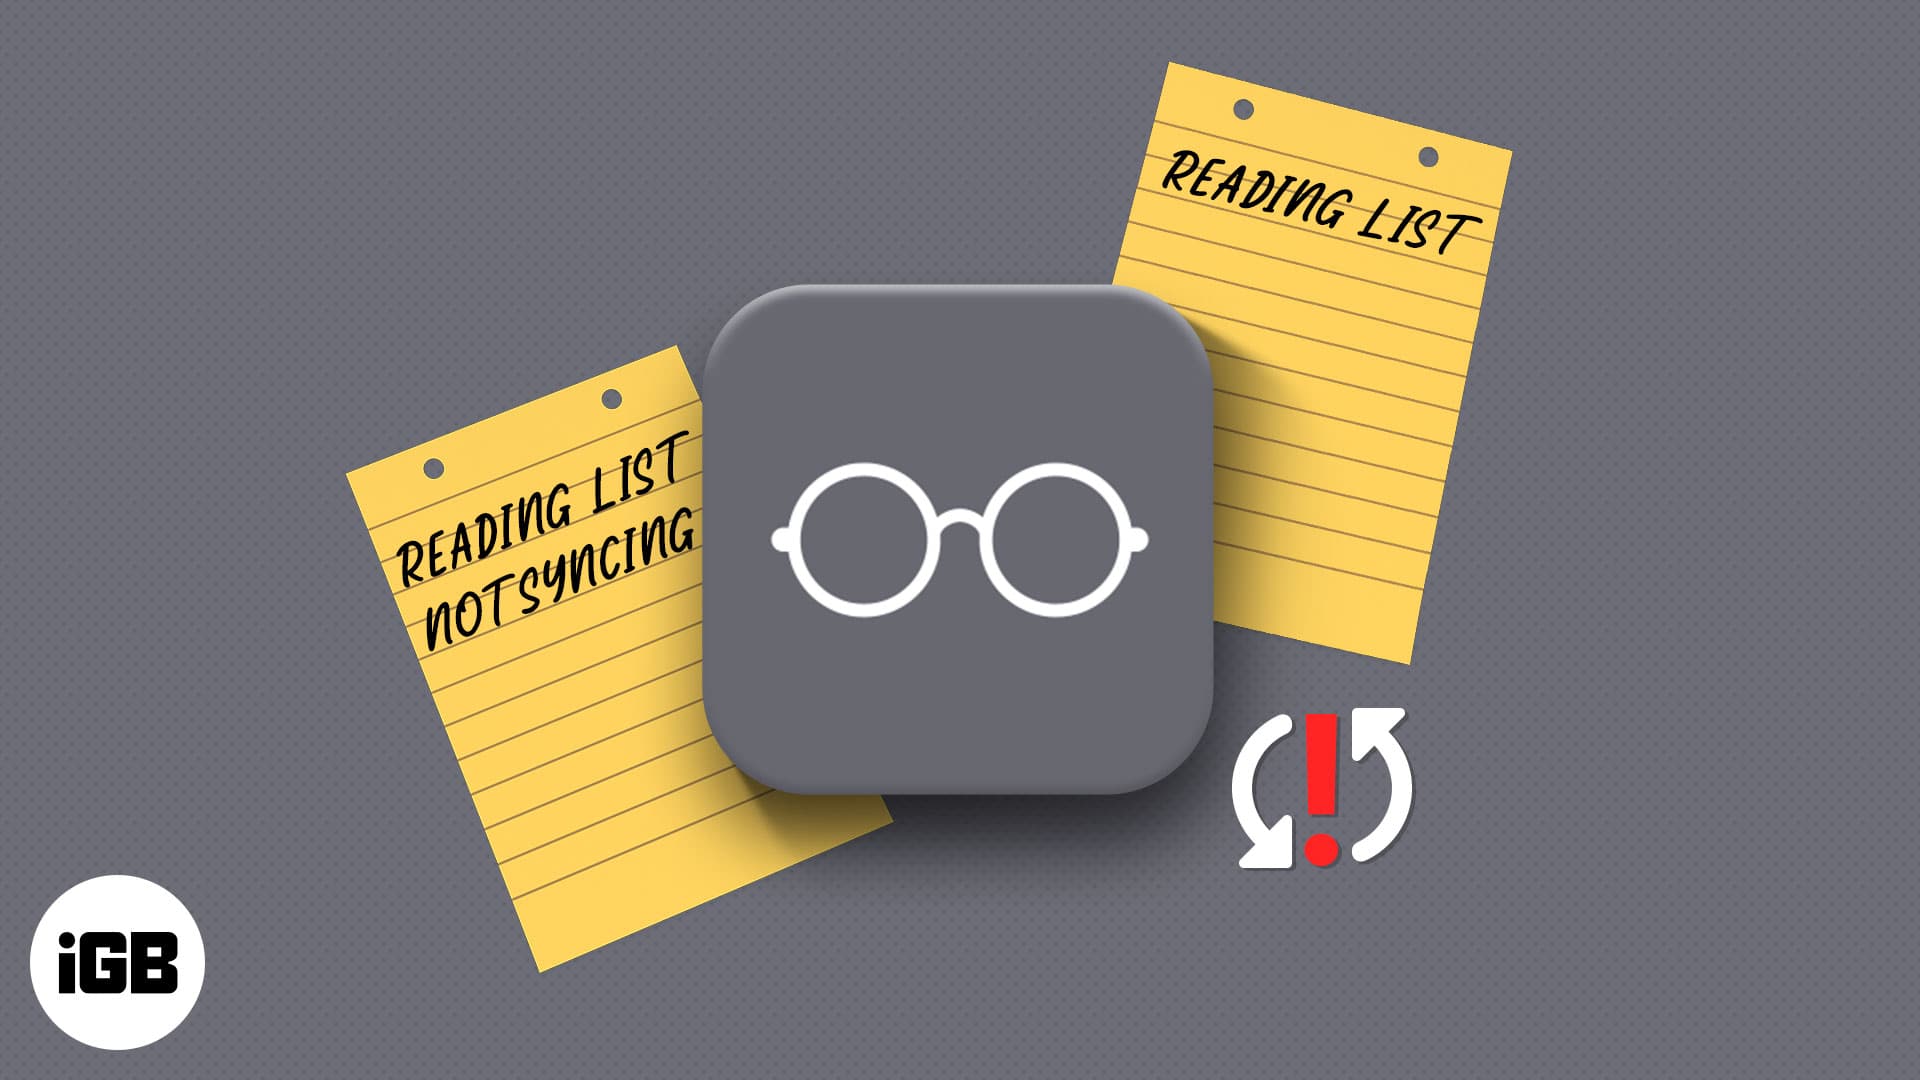 A dark gray app icon with a pair of white glasses on it is placed between two yellow sticky notes that say 'Reading List' on them. The sticky note on the left says 'not syncing' and the one of the right says 'syncing'.